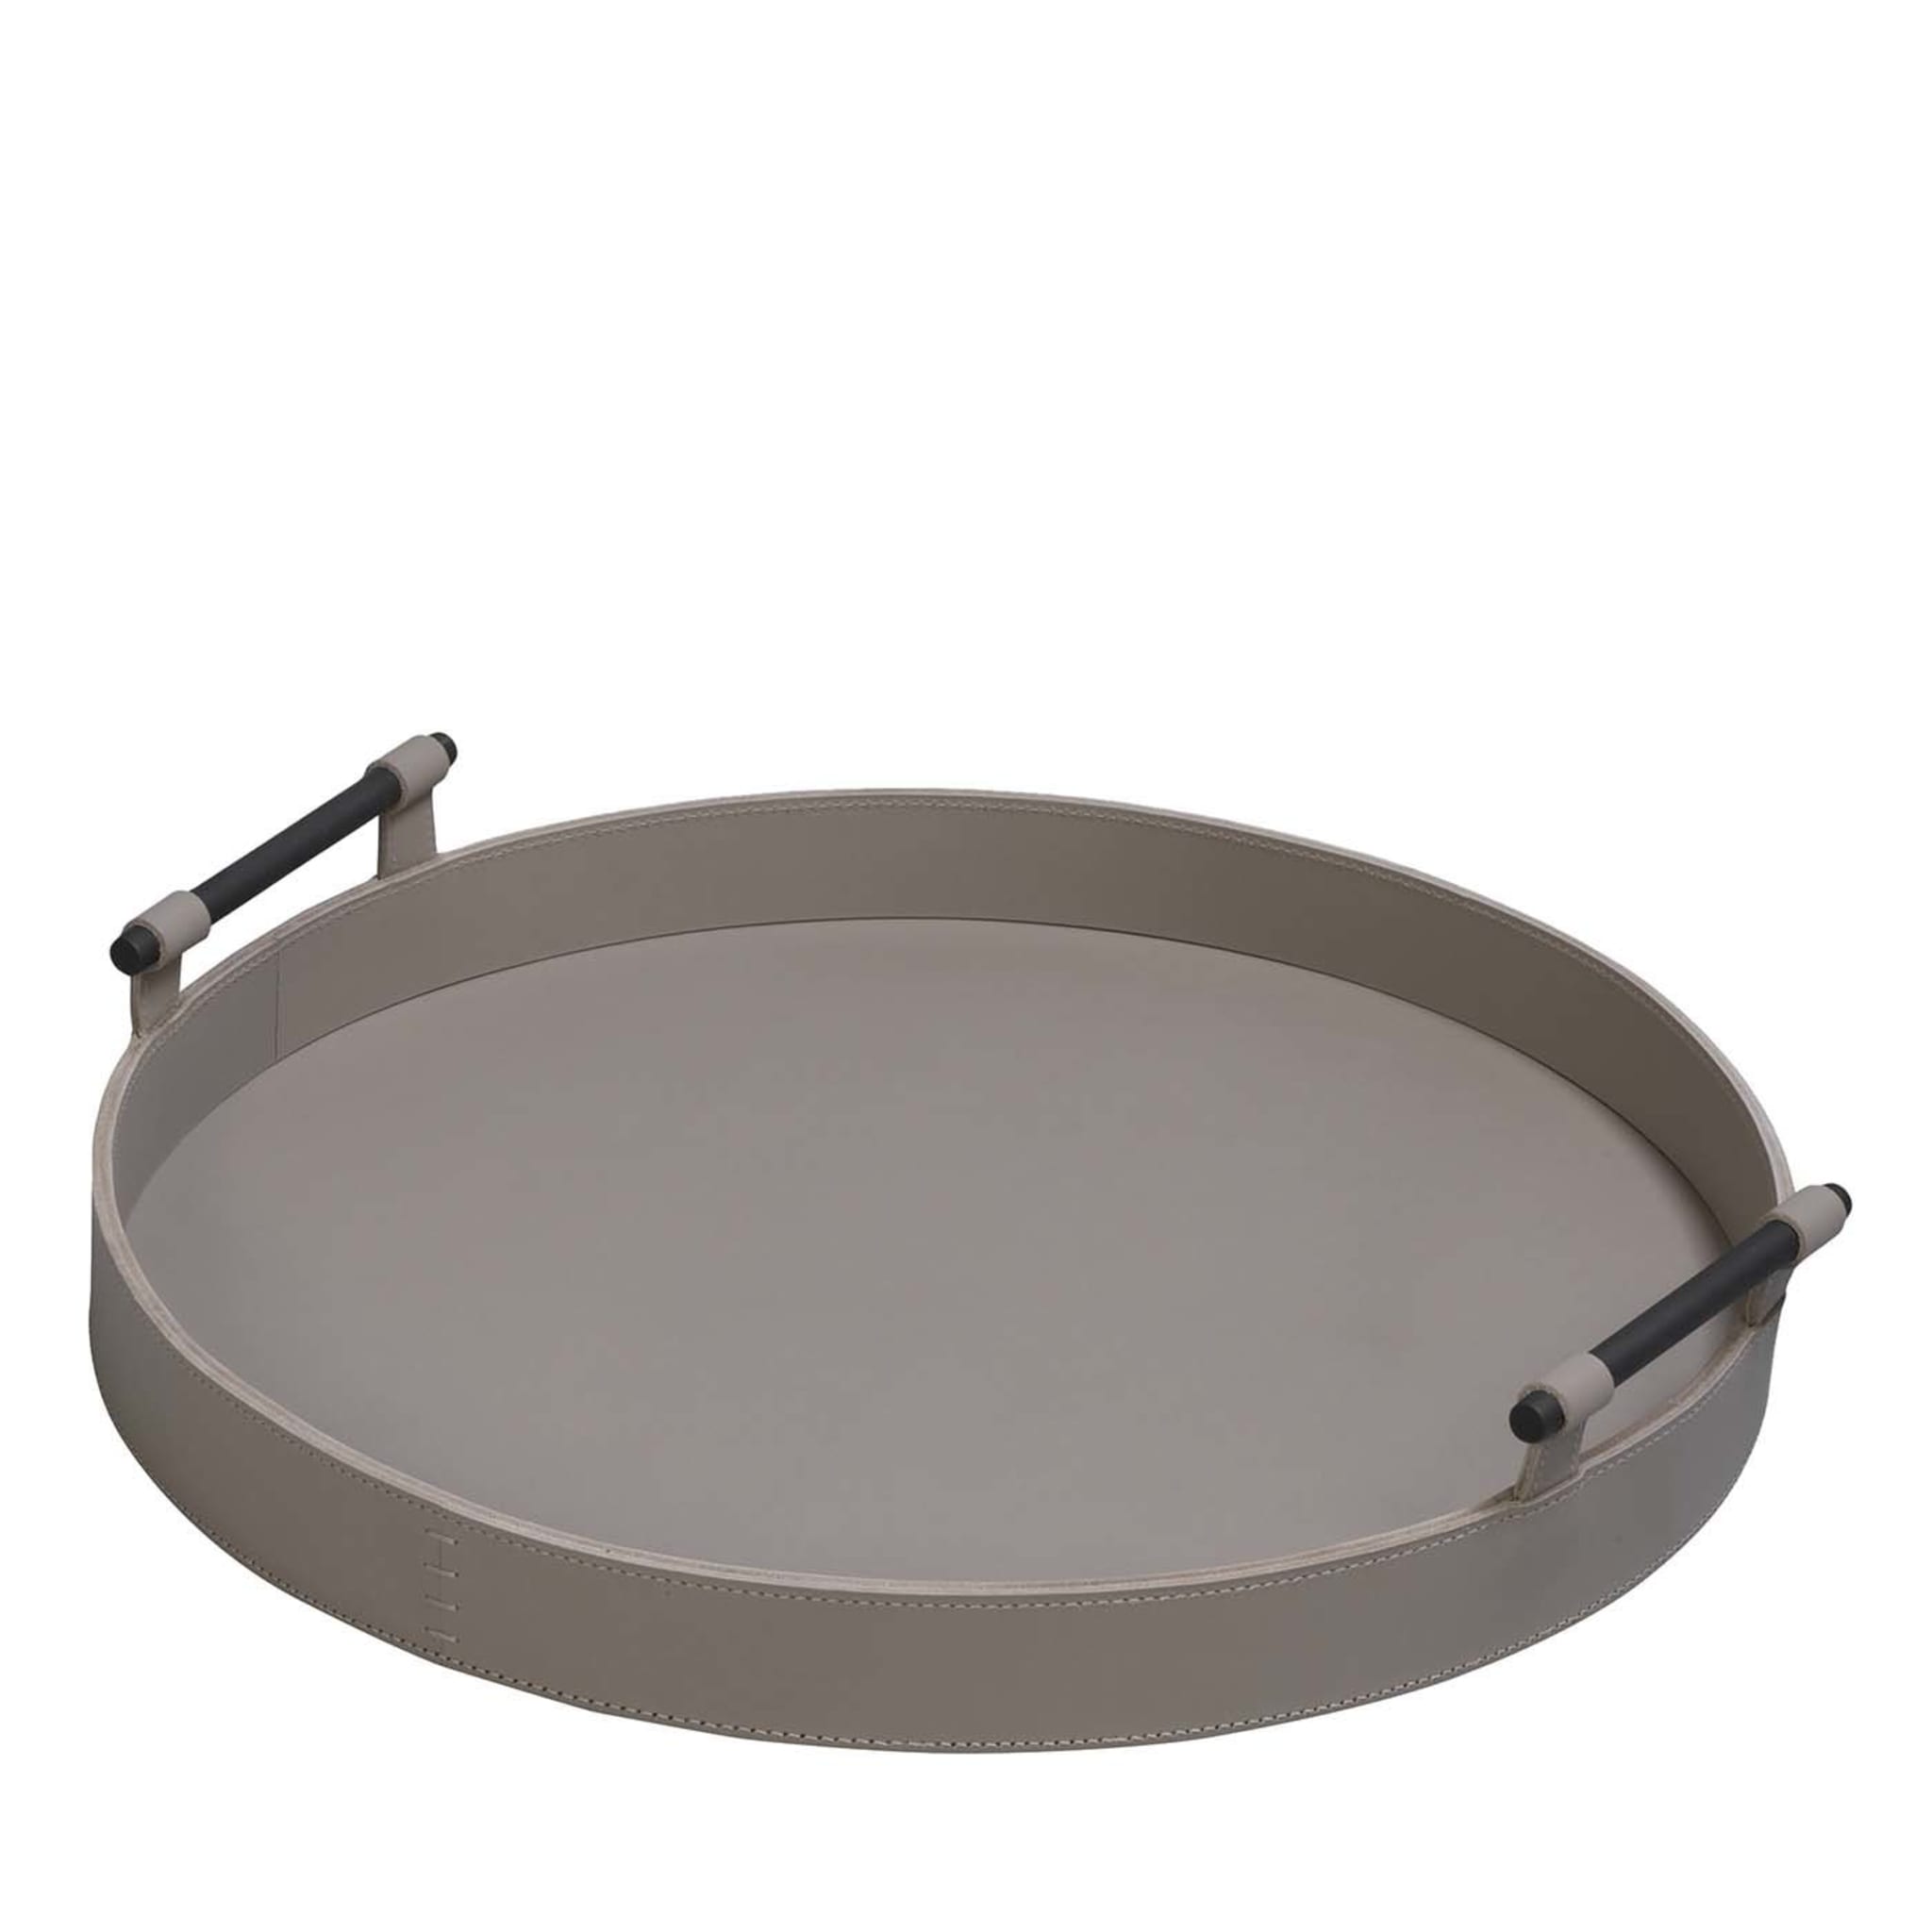 Portofino Large Round Tray in Sand Leather - Main view